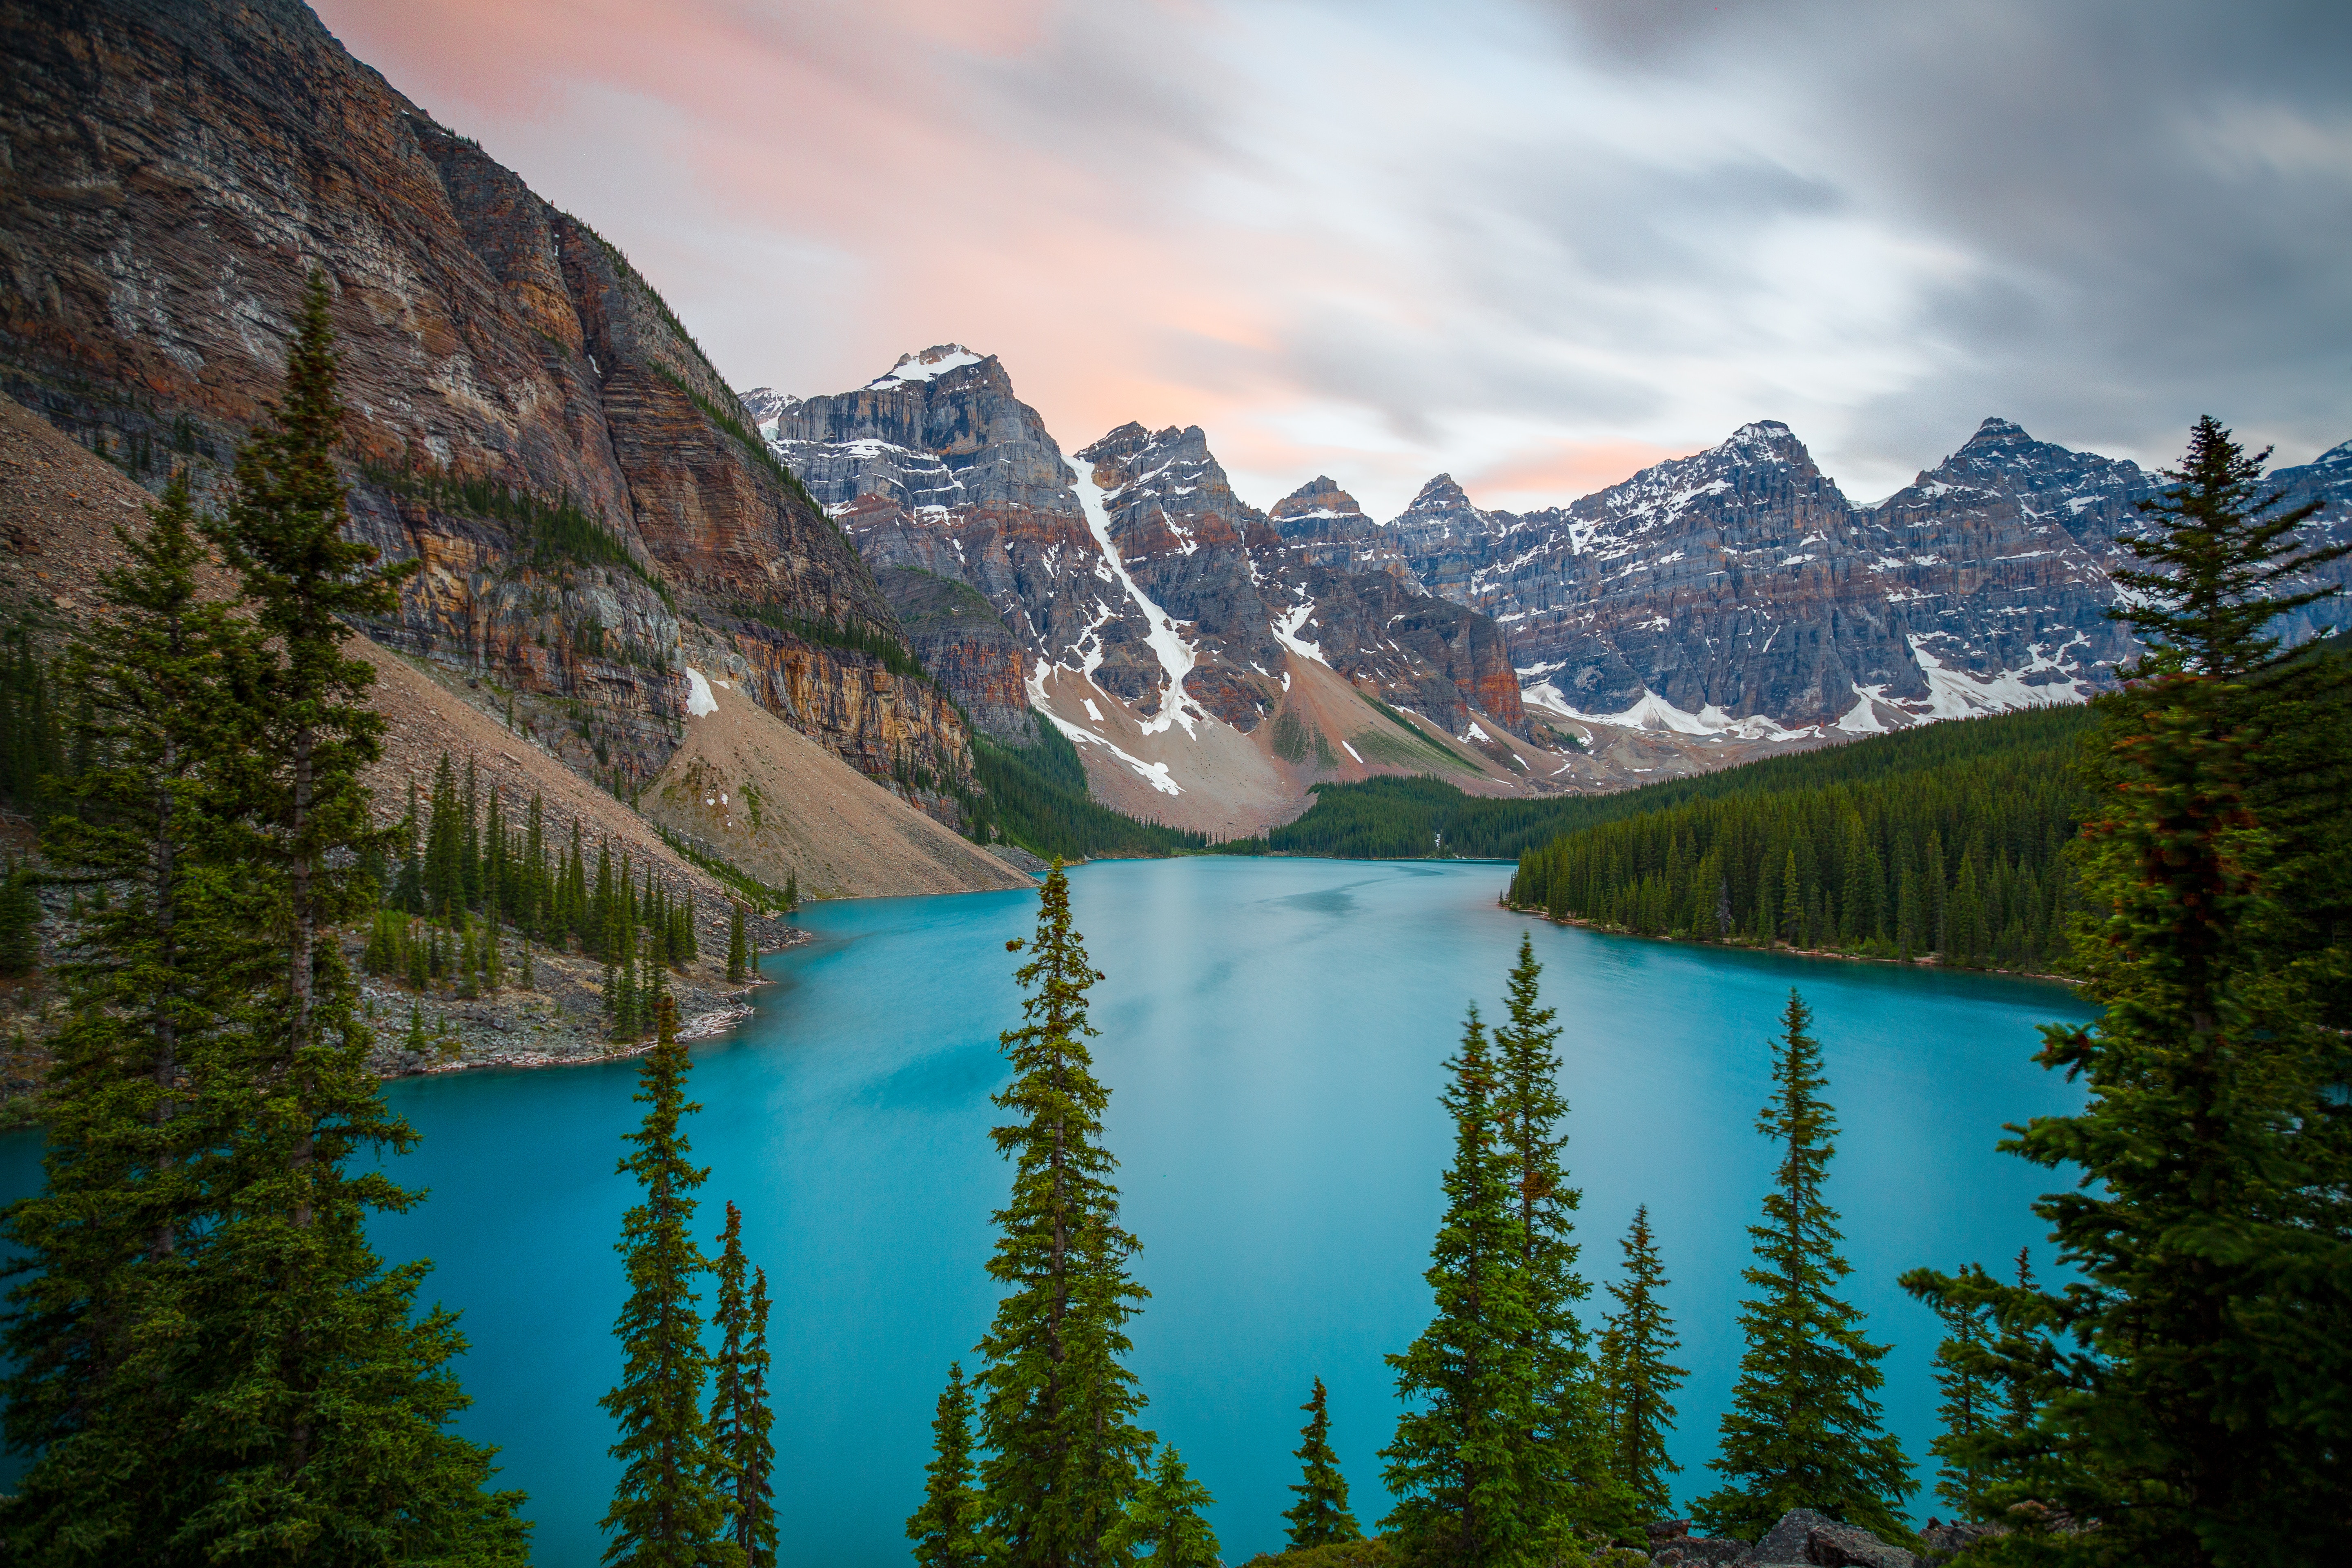 General 5760x3840 nature trees water snow Banff National Park landscape mountains Moraine Lake Canada